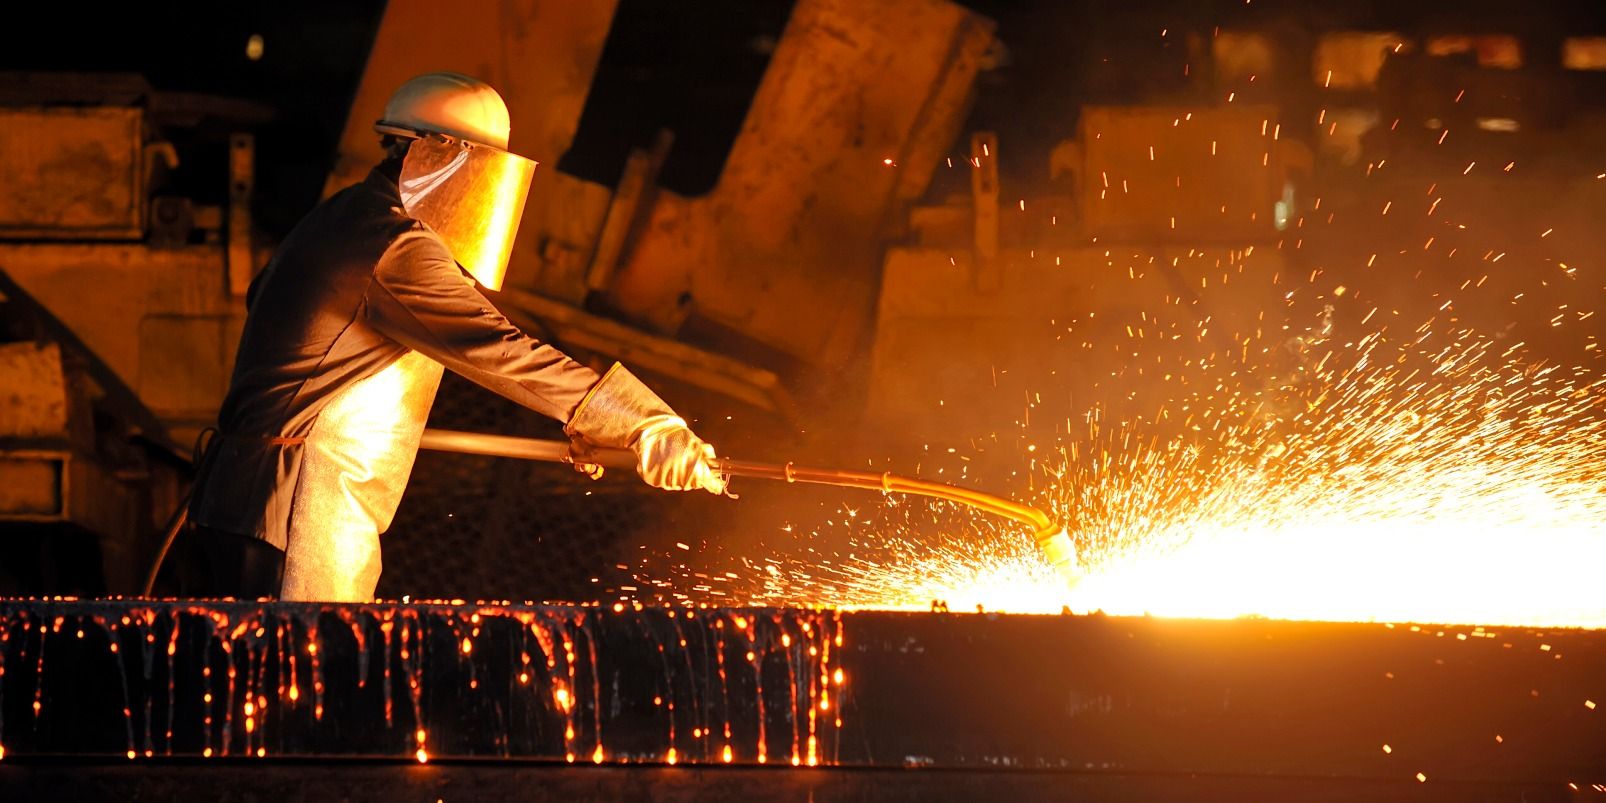 India S Steel Industry Surpasses Japan Surging Into Second Place In Global Steel Production